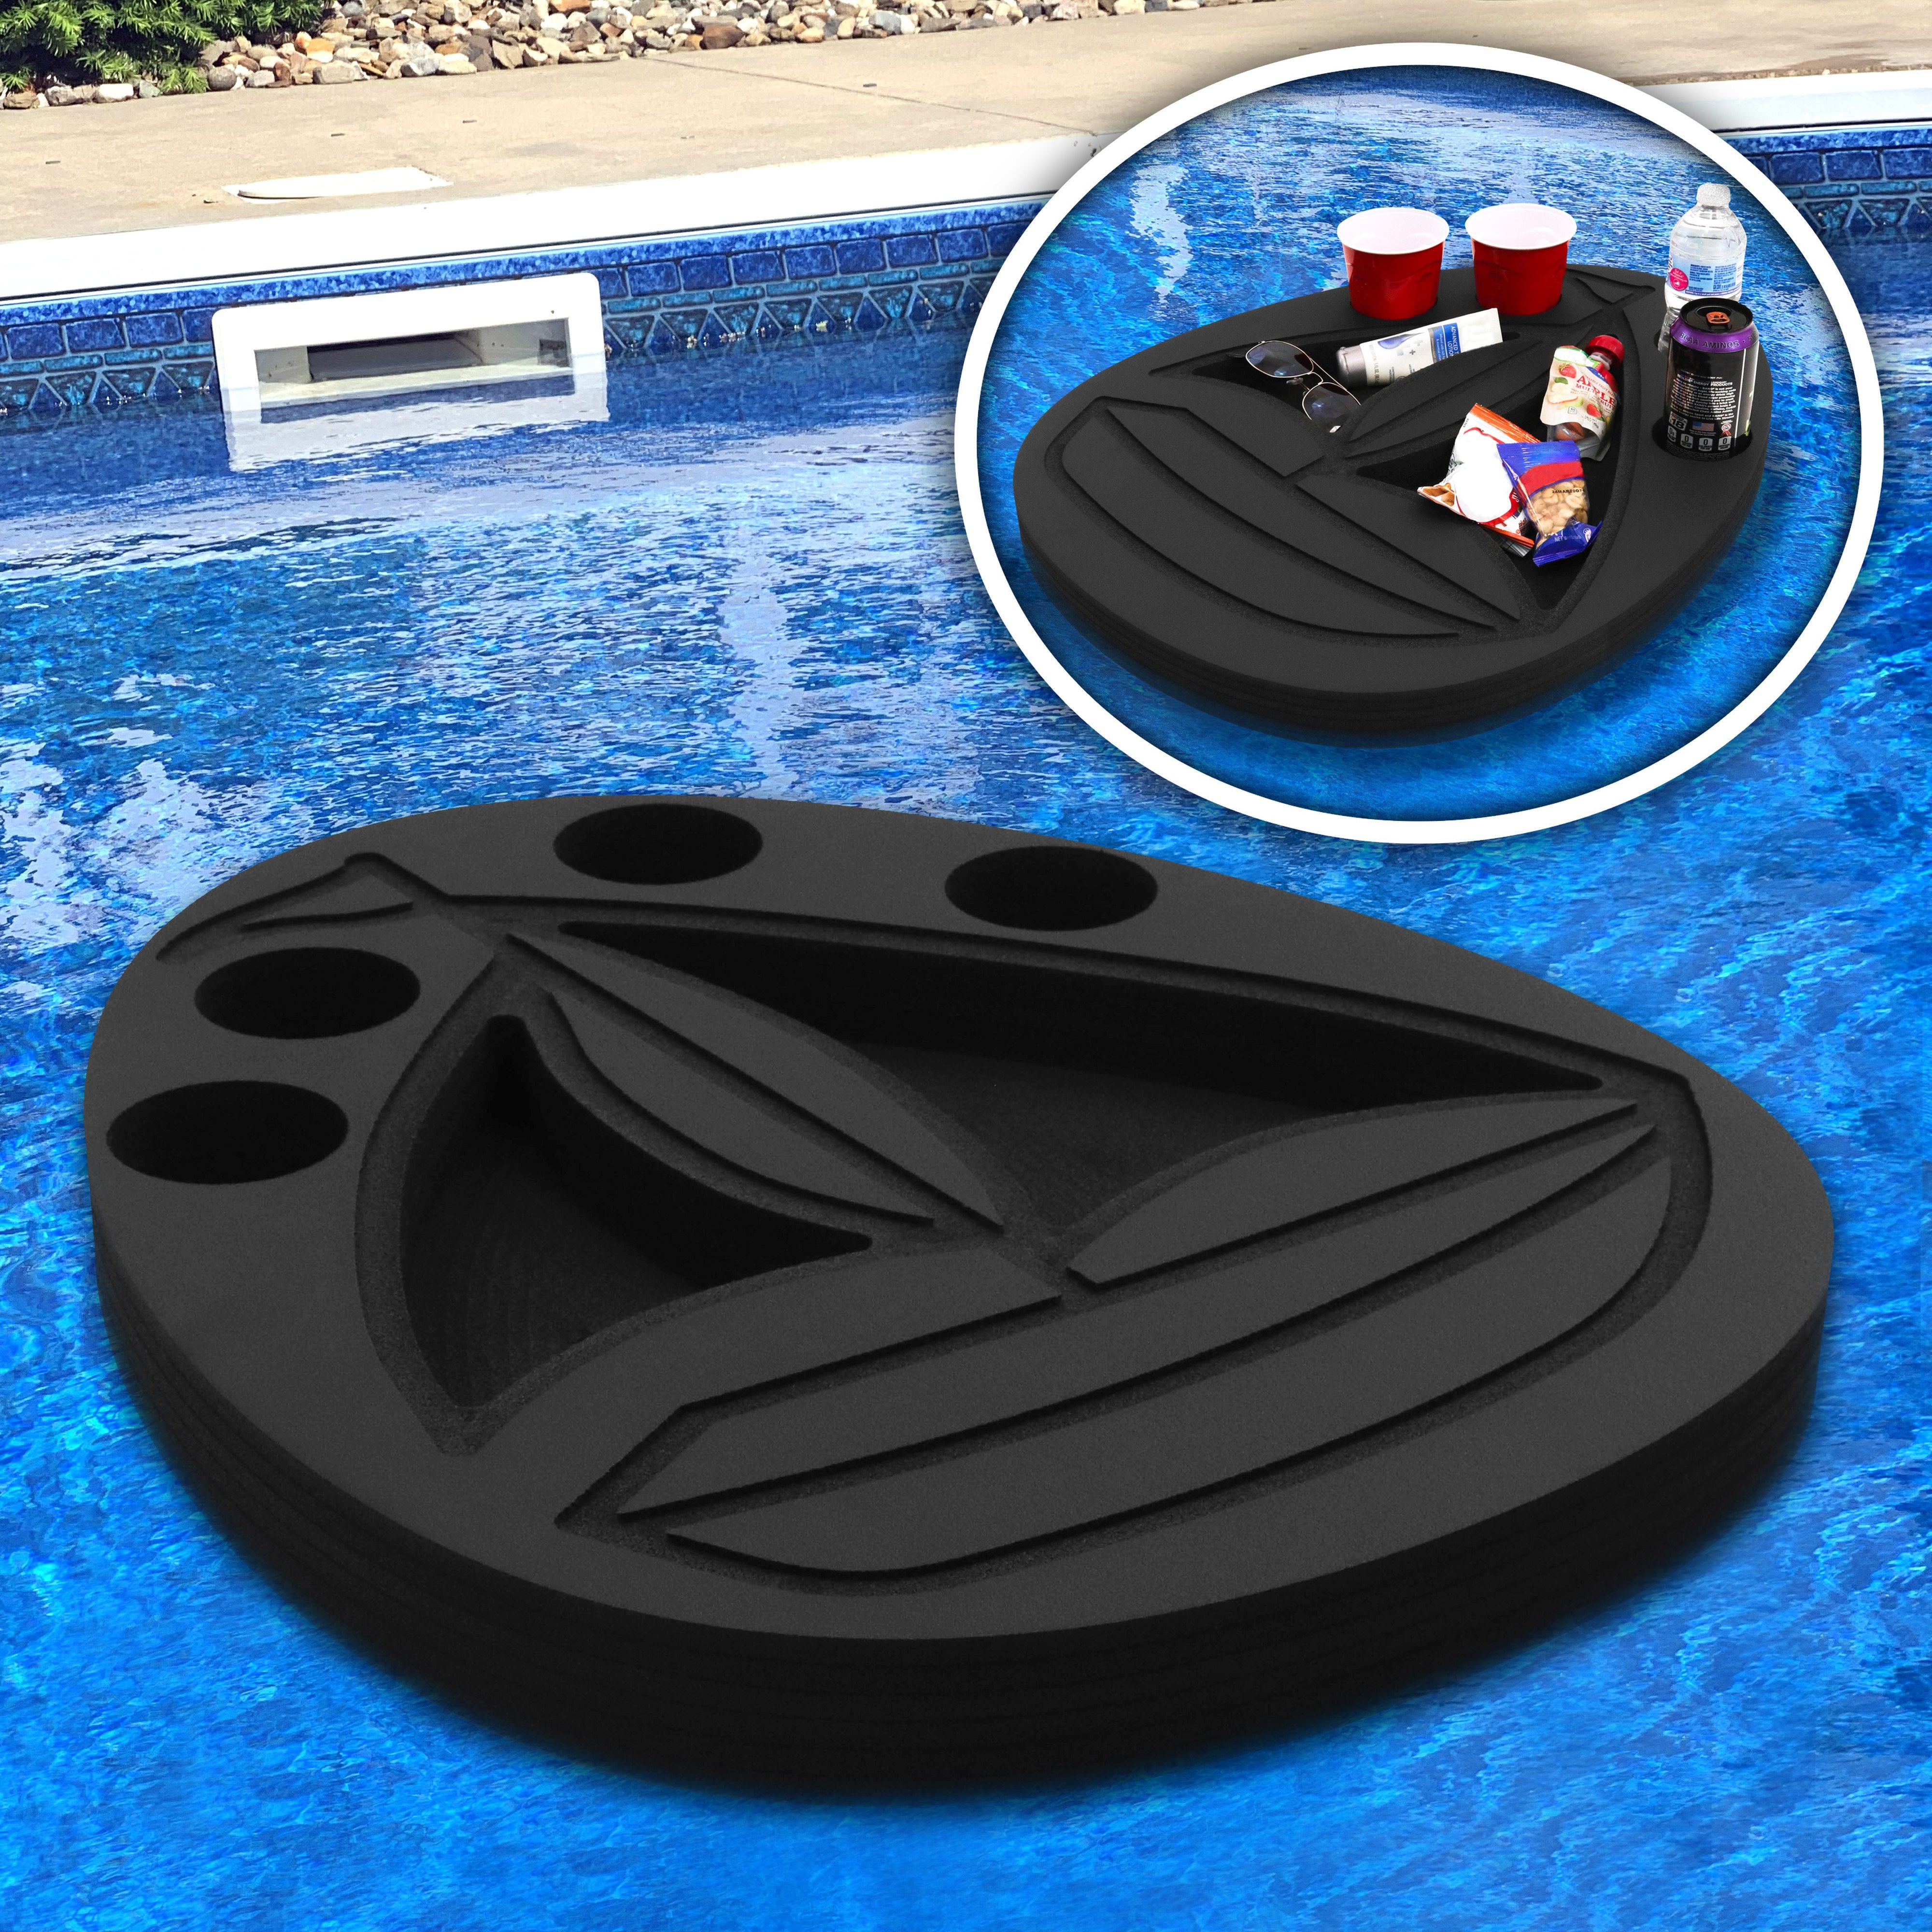 Sail Boat Shaped Drink Holder Floating Refreshment Table Tray for Pool or Beach Party Float Lounge Durable Black Foam 6 Compartment 2 Feet